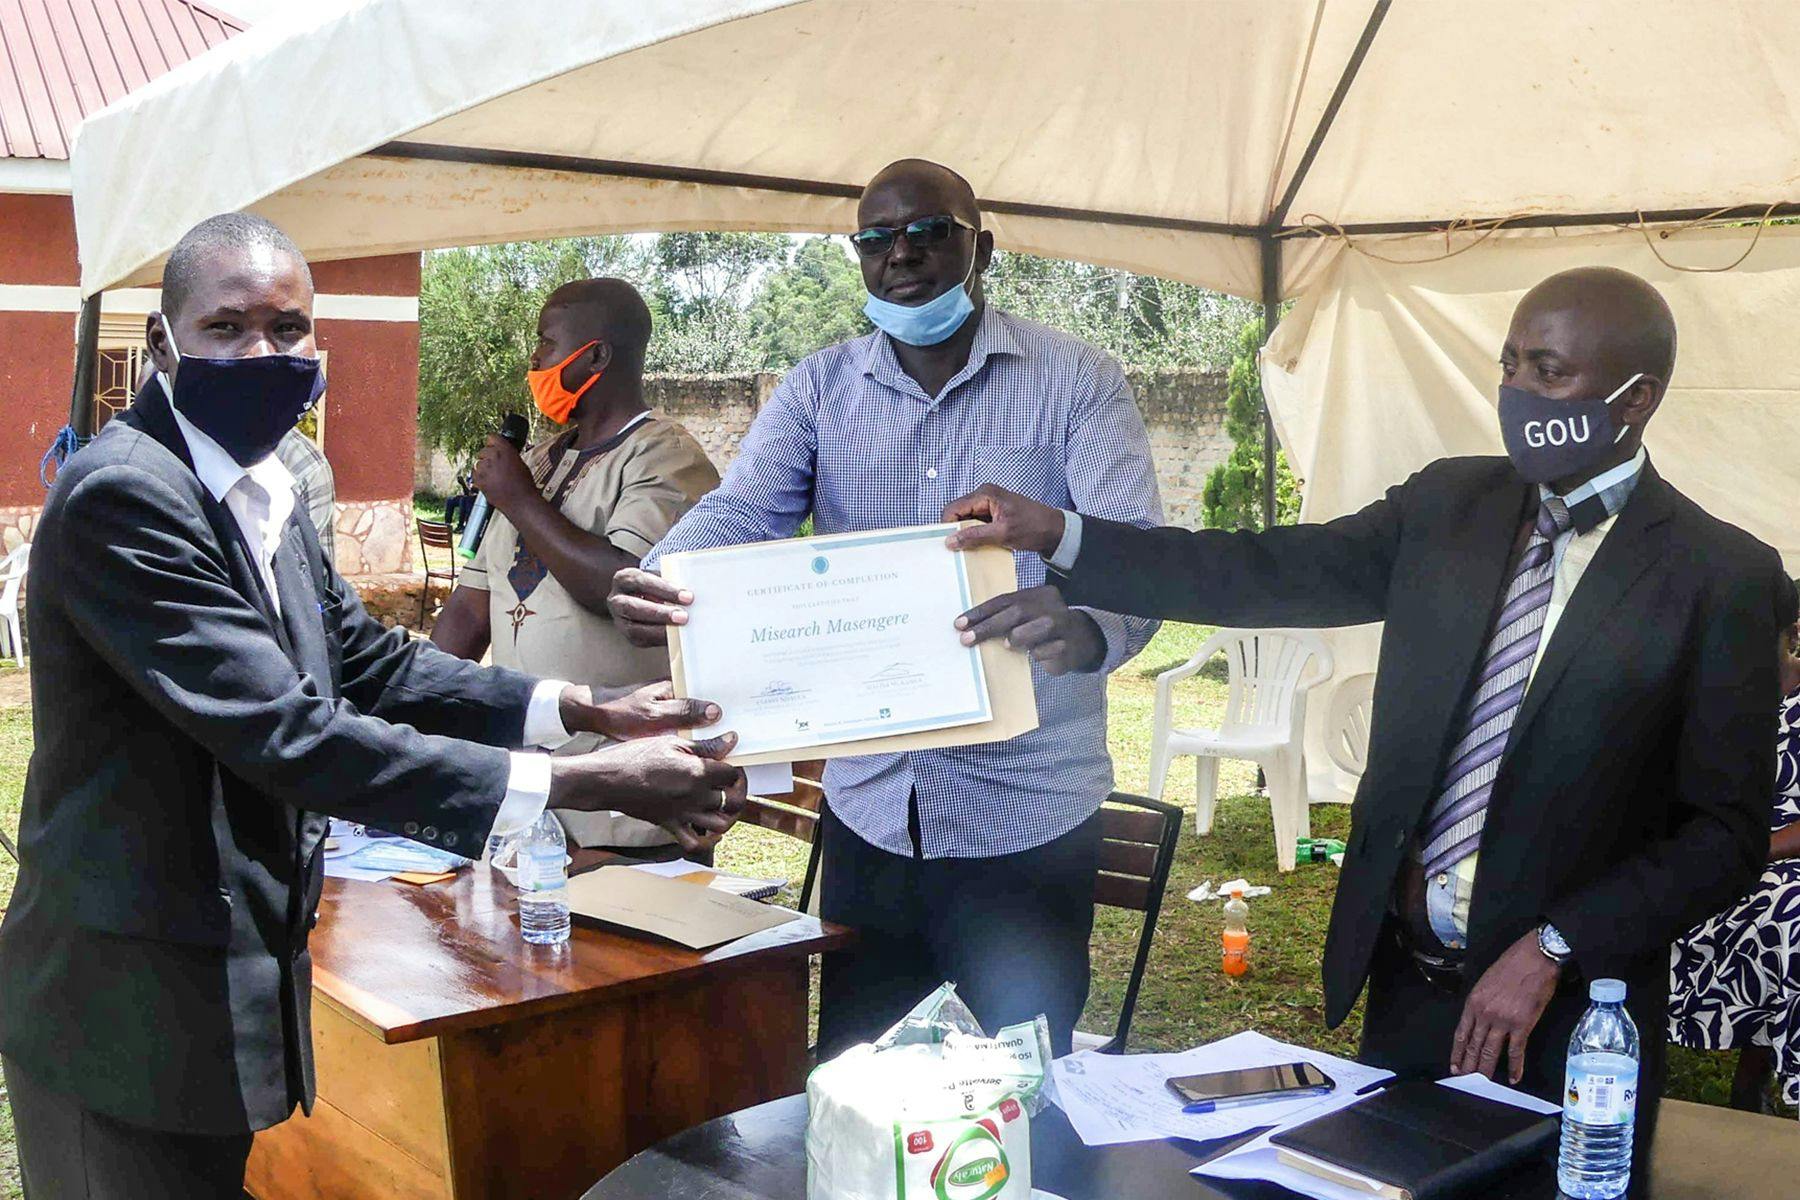 Misearch receiving his certificate at the UCAT Kakumiro close-out ceremony